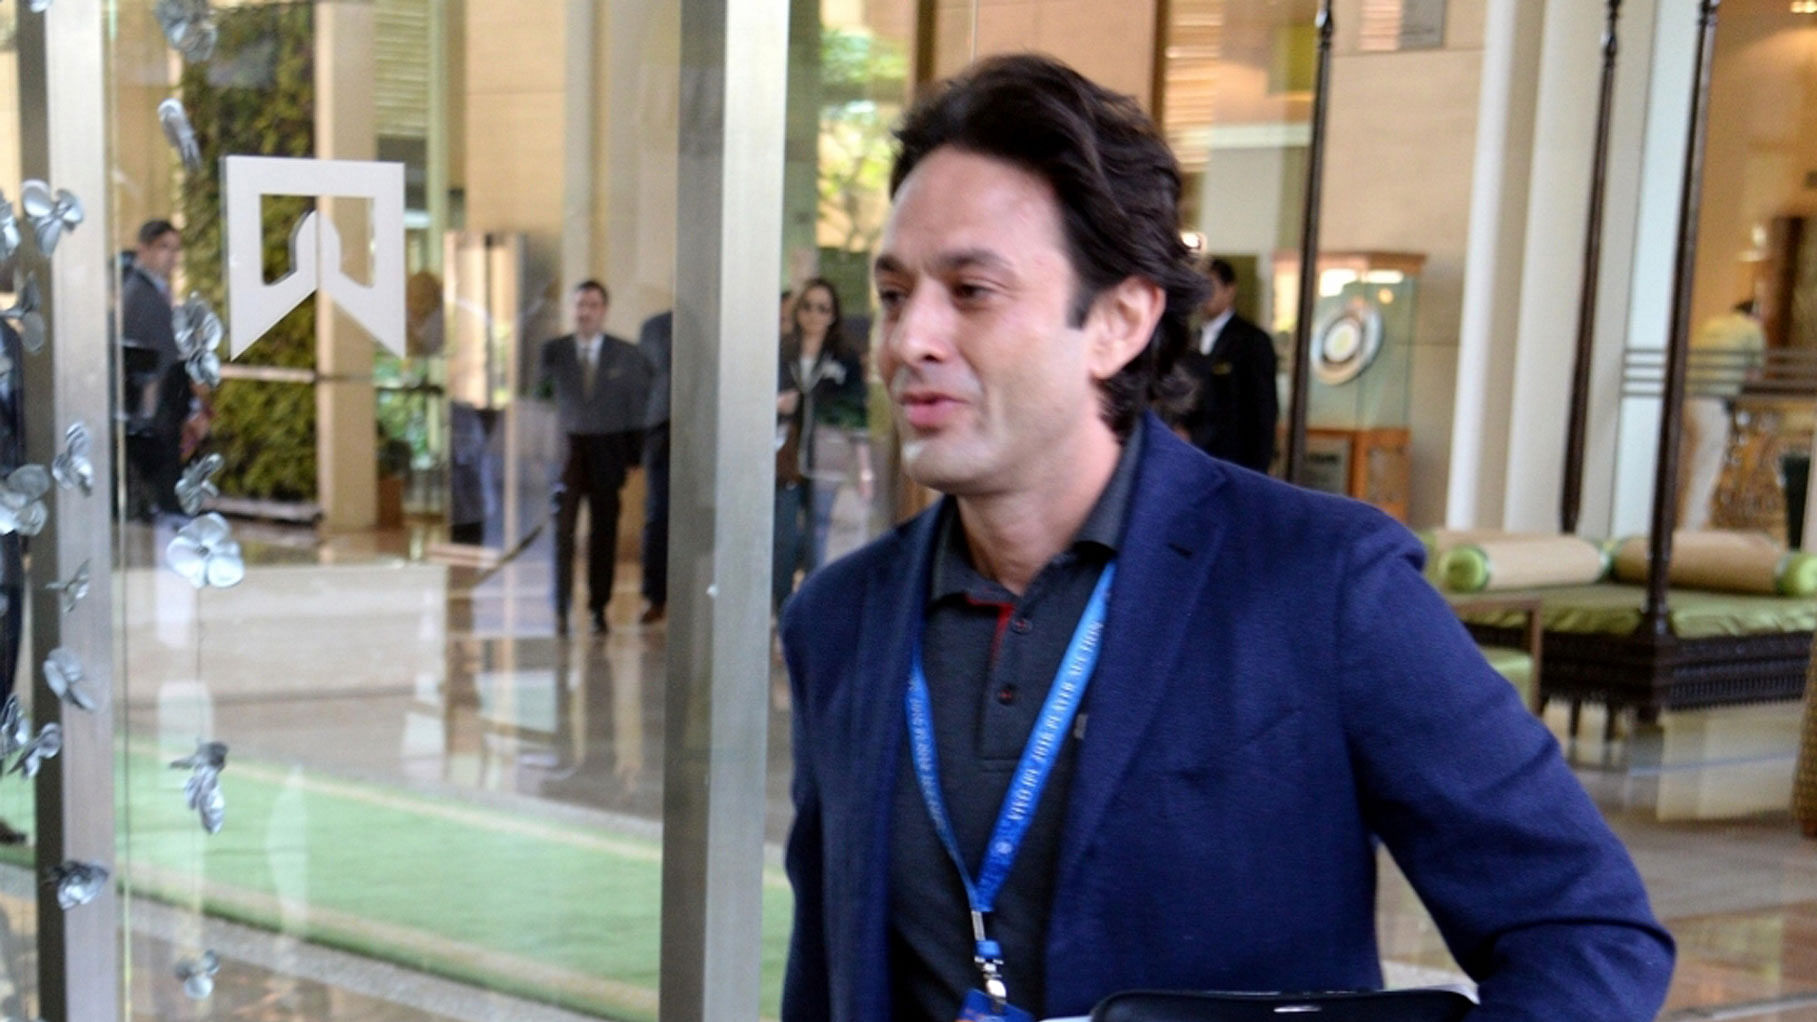 Ness Wadia was handed the sentence which was suspended for five years.